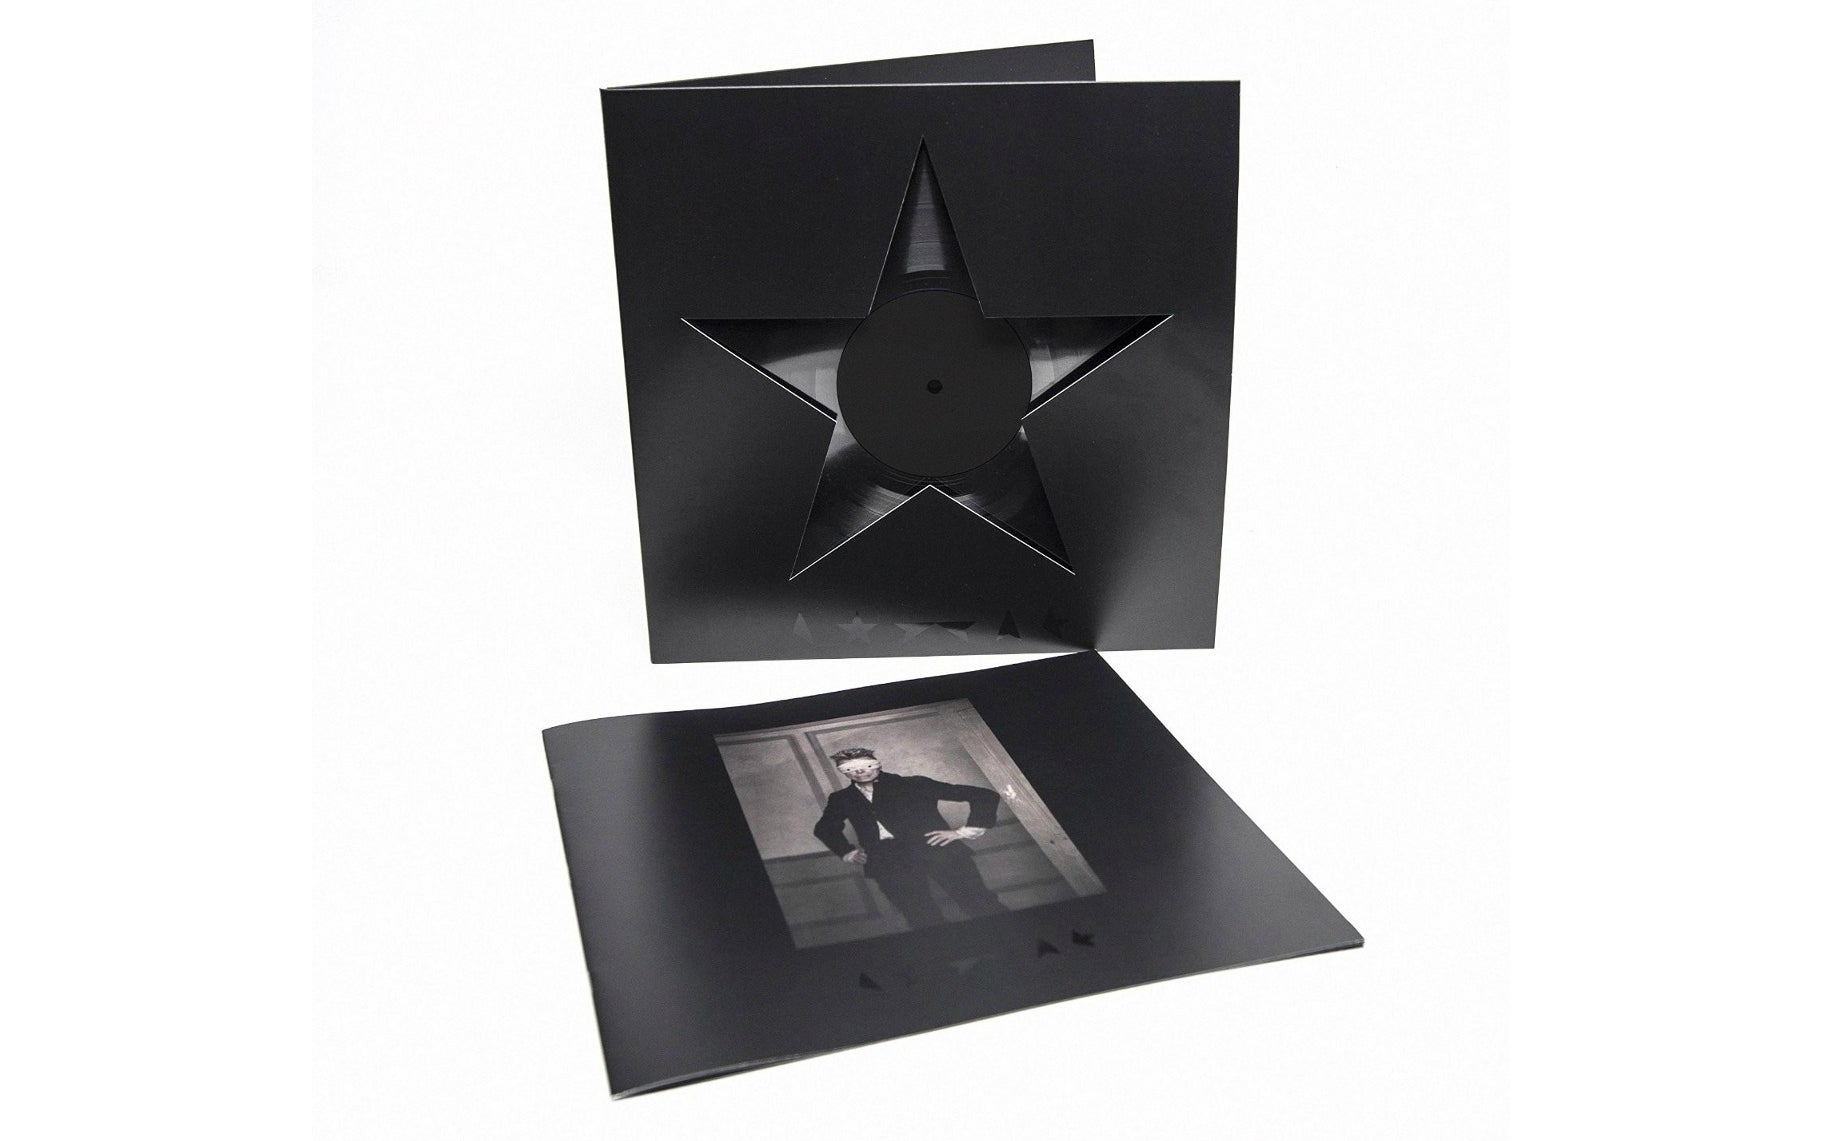 David Bowie a beautiful secret in the Blackstar vinyl that comes out it's left in the sun | The Independent | The Independent